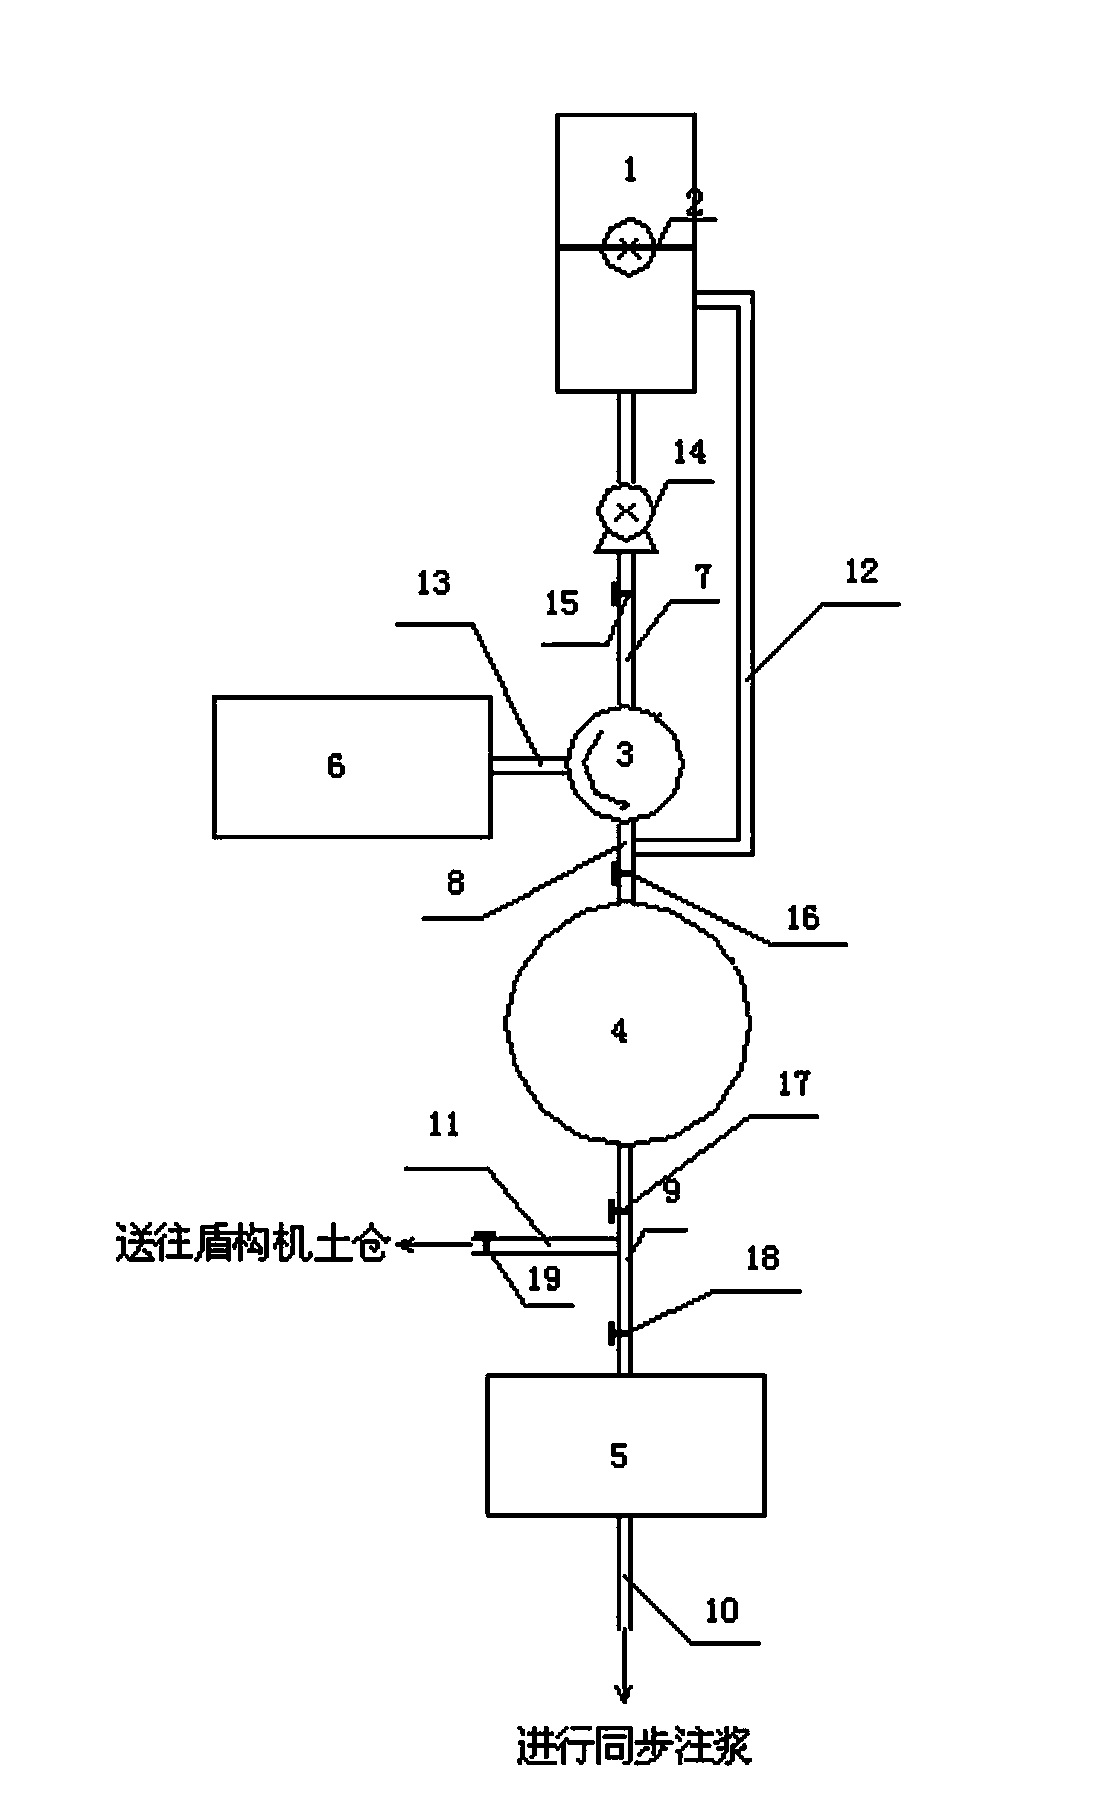 Shield sludge cleansing/recycling/reusing system and method